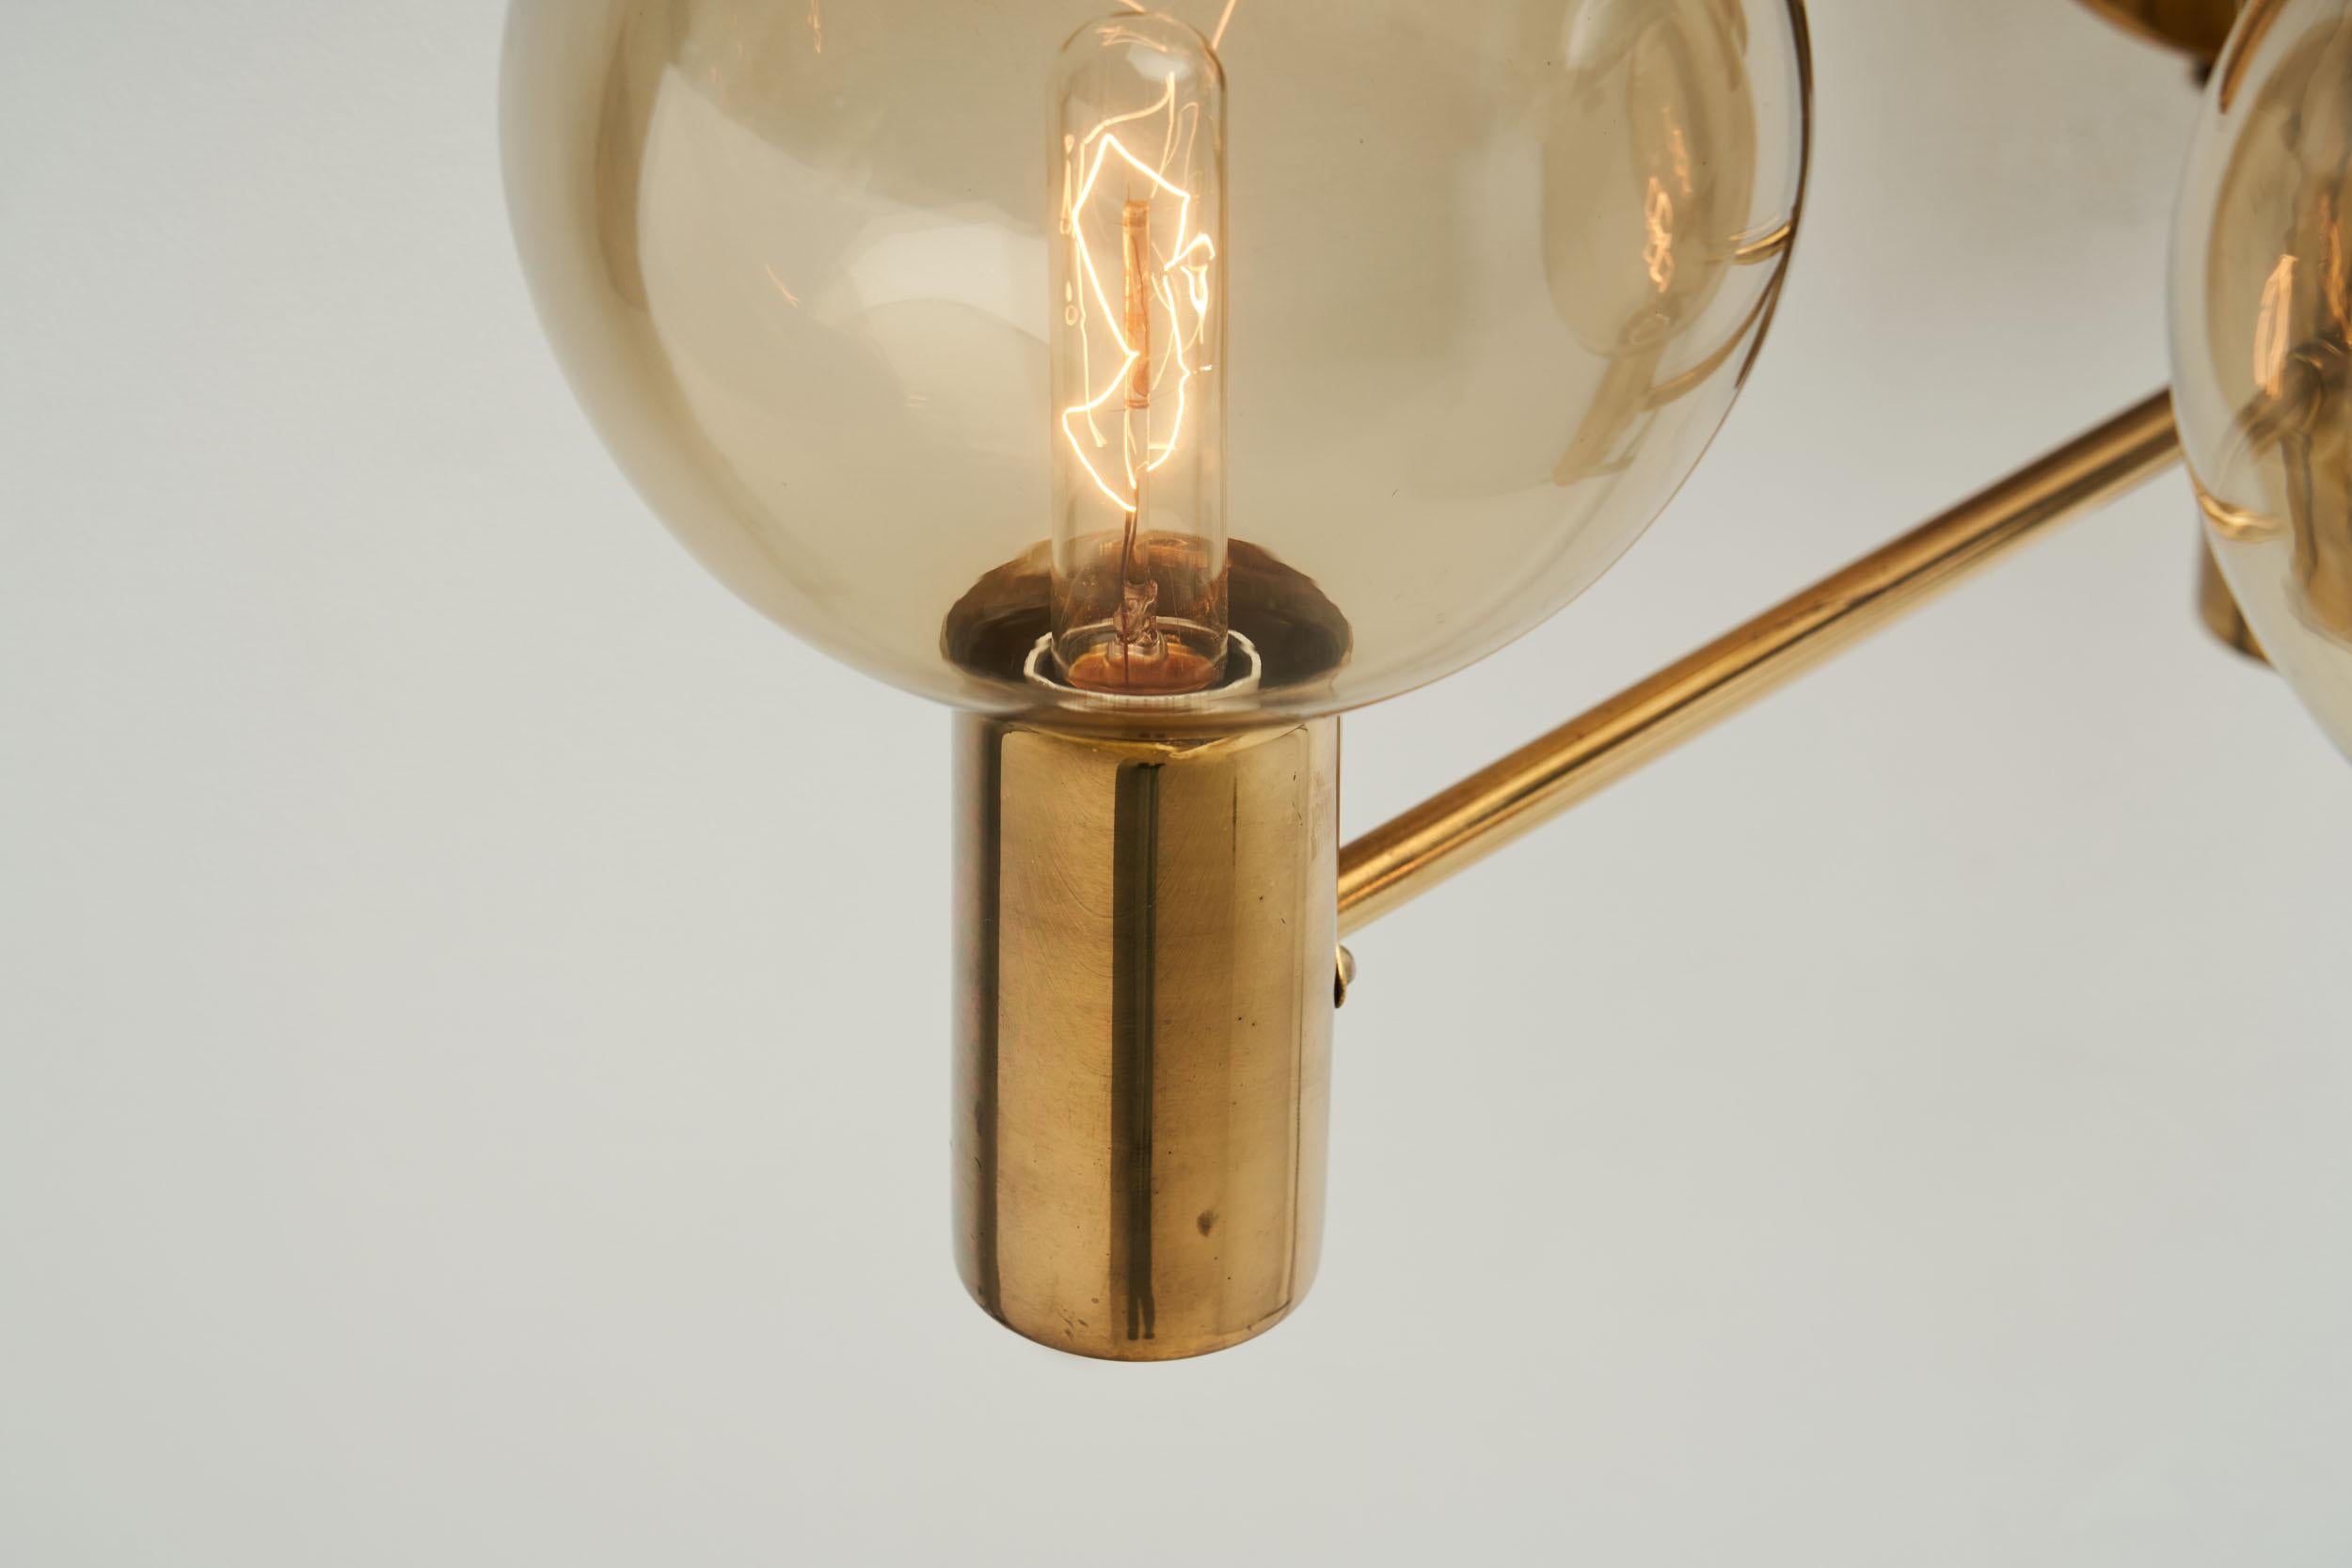 20th Century Hans-Agne Jakobsson Brass Wall Lamp with Smoked Glass Shades, Sweden, 1960s For Sale